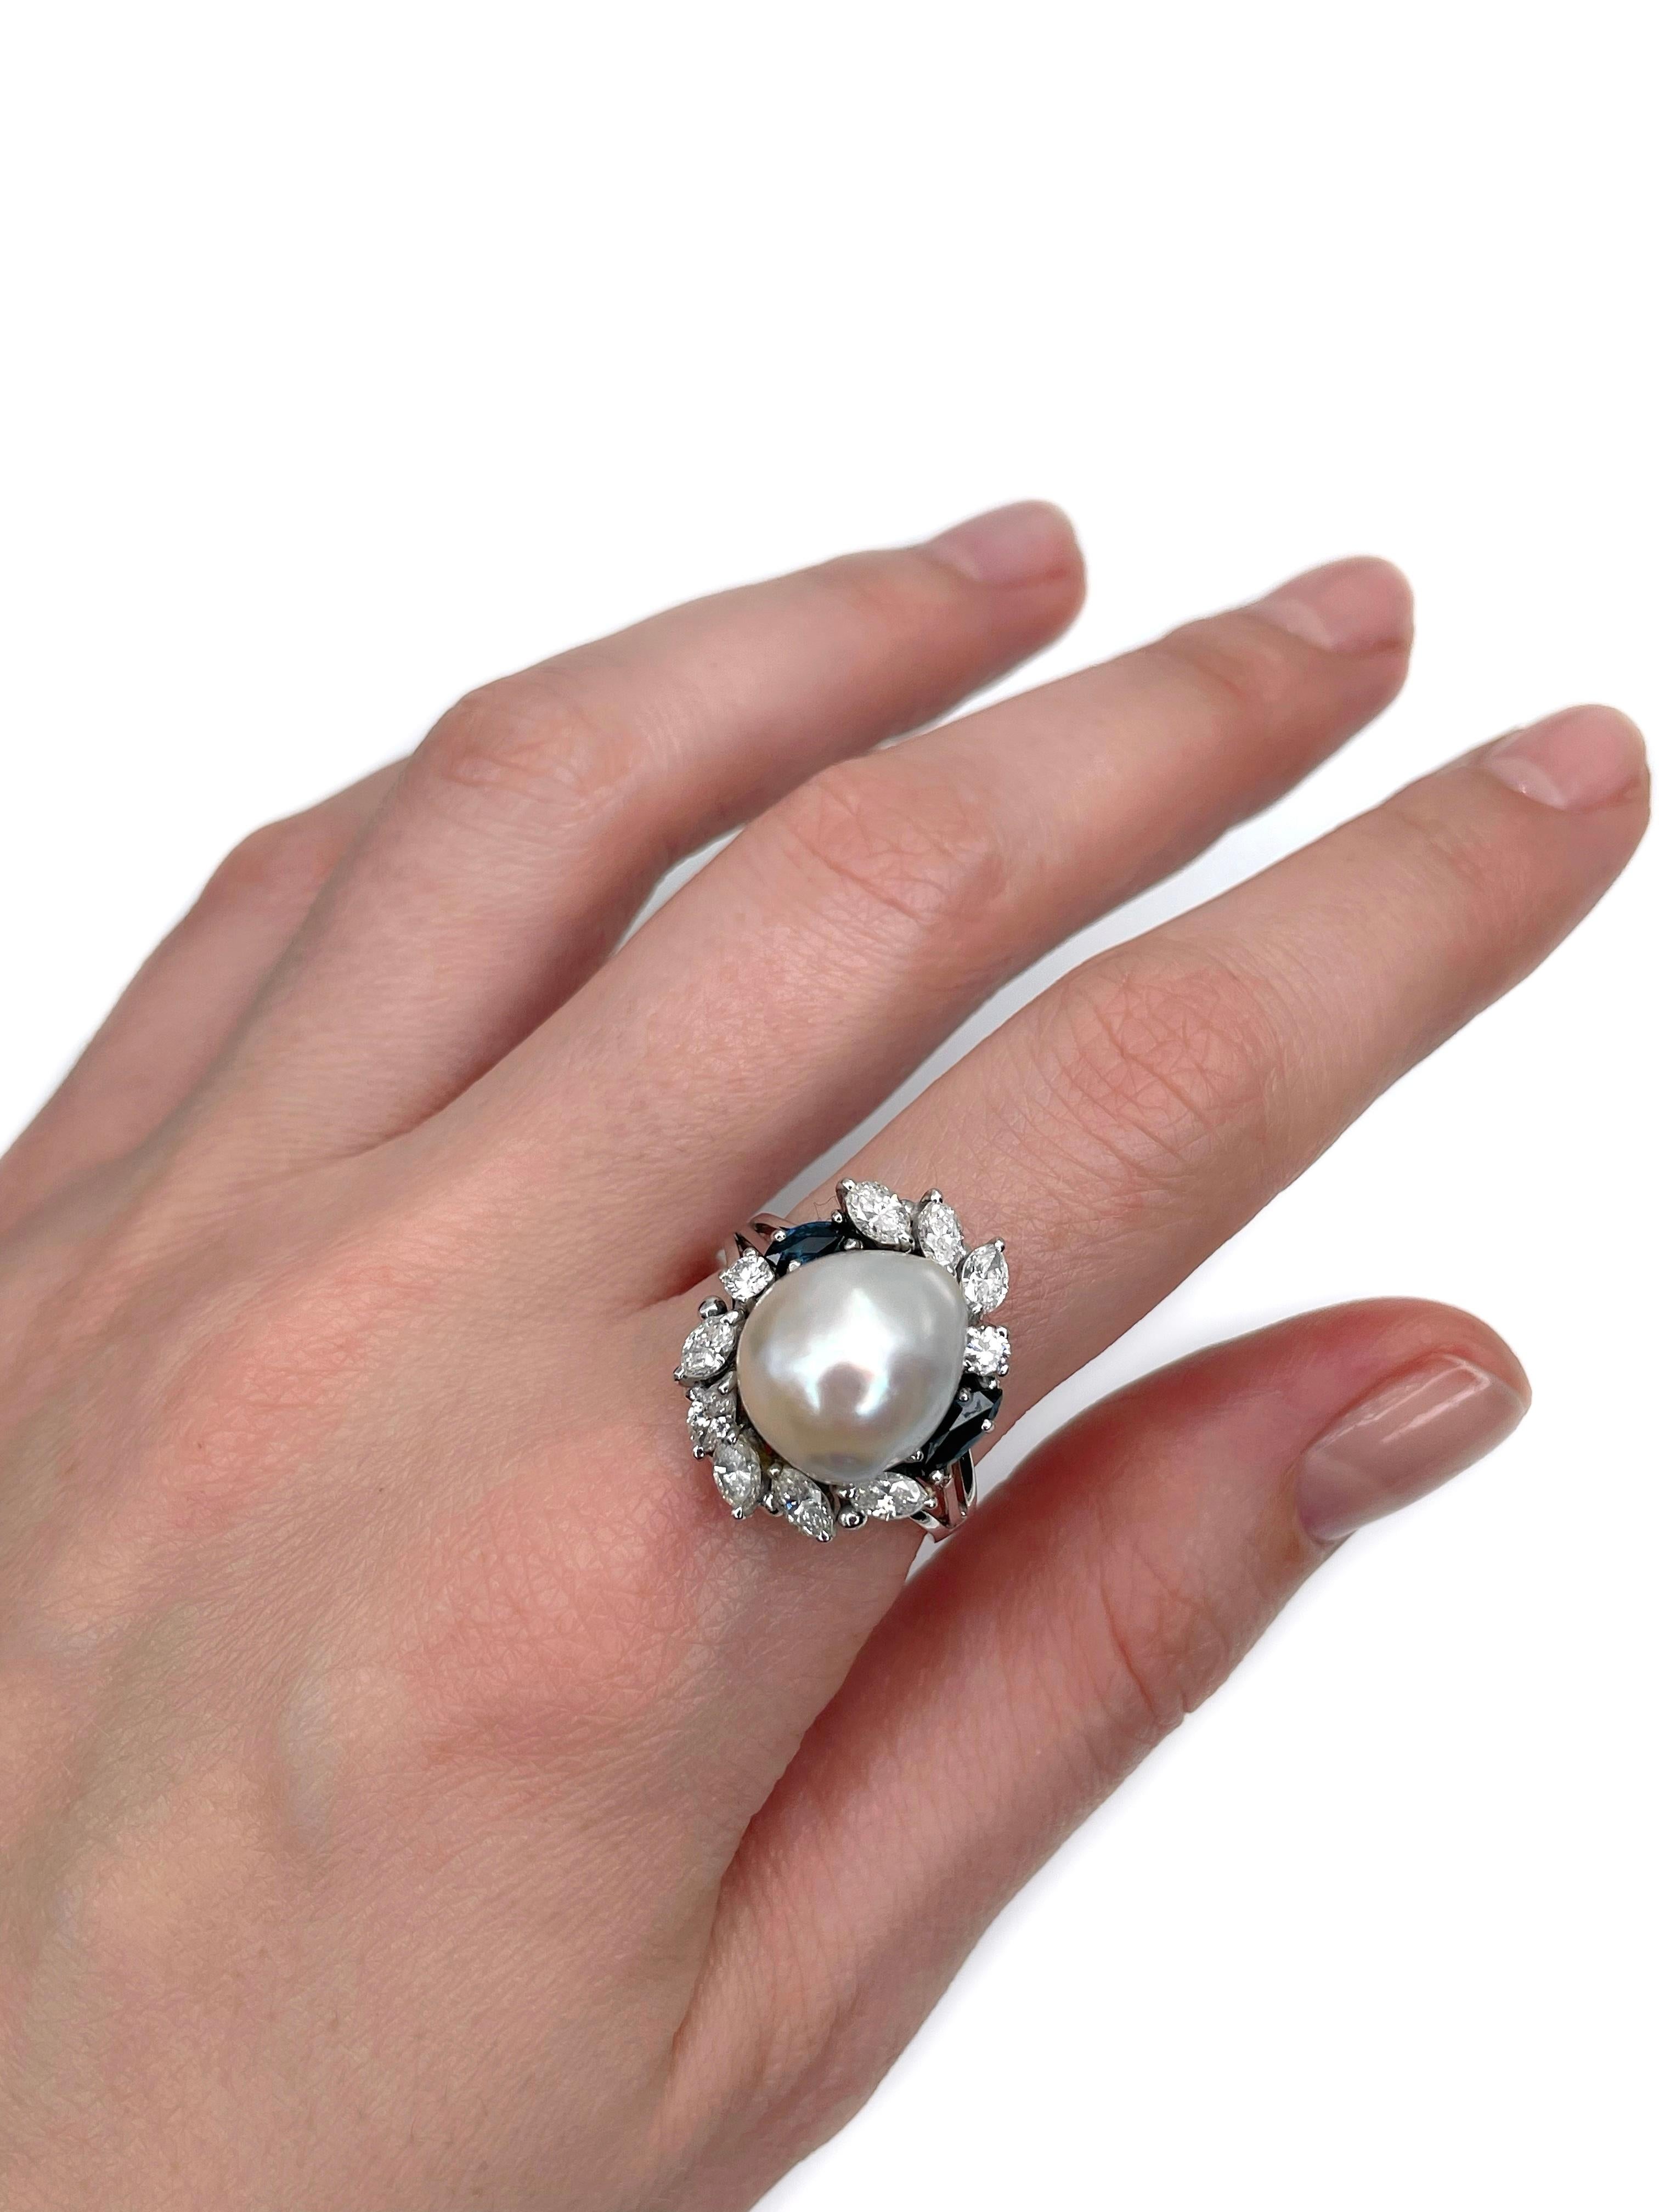 This is a modern design cocktail ring crafted in 9K white gold. Circa 1980. 

The piece features:
- 1 cultured pearl
- 10 diamonds, marquise and round brilliant cut, TW 1.20ct, RW-W, VS-SI
- 2 sapphires, marquise cut, TW 0.45ct, vB 6/4,